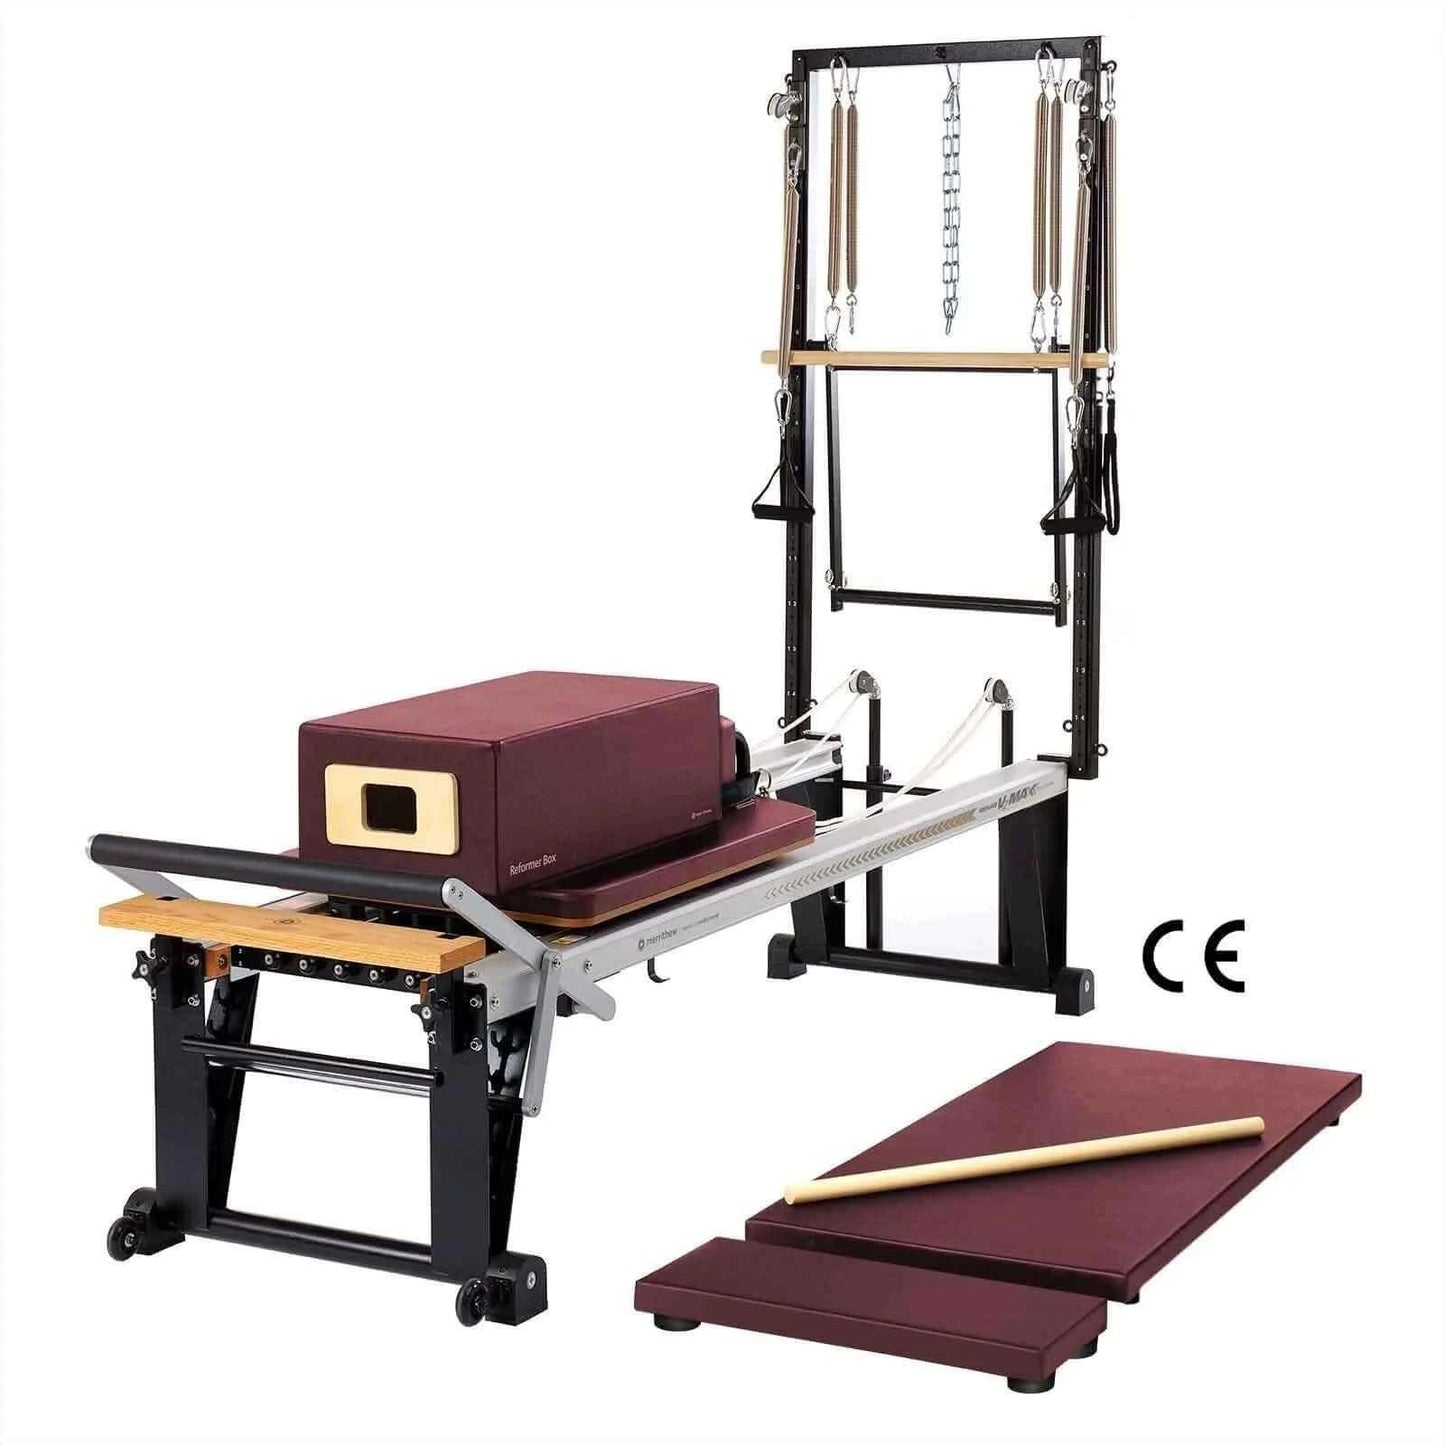 Red Truffle Merrithew™ Pilates Rehab V2 Max Plus™ Reformer Bundle by Merrithew™ sold by Pilates Matters® by BSP LLC